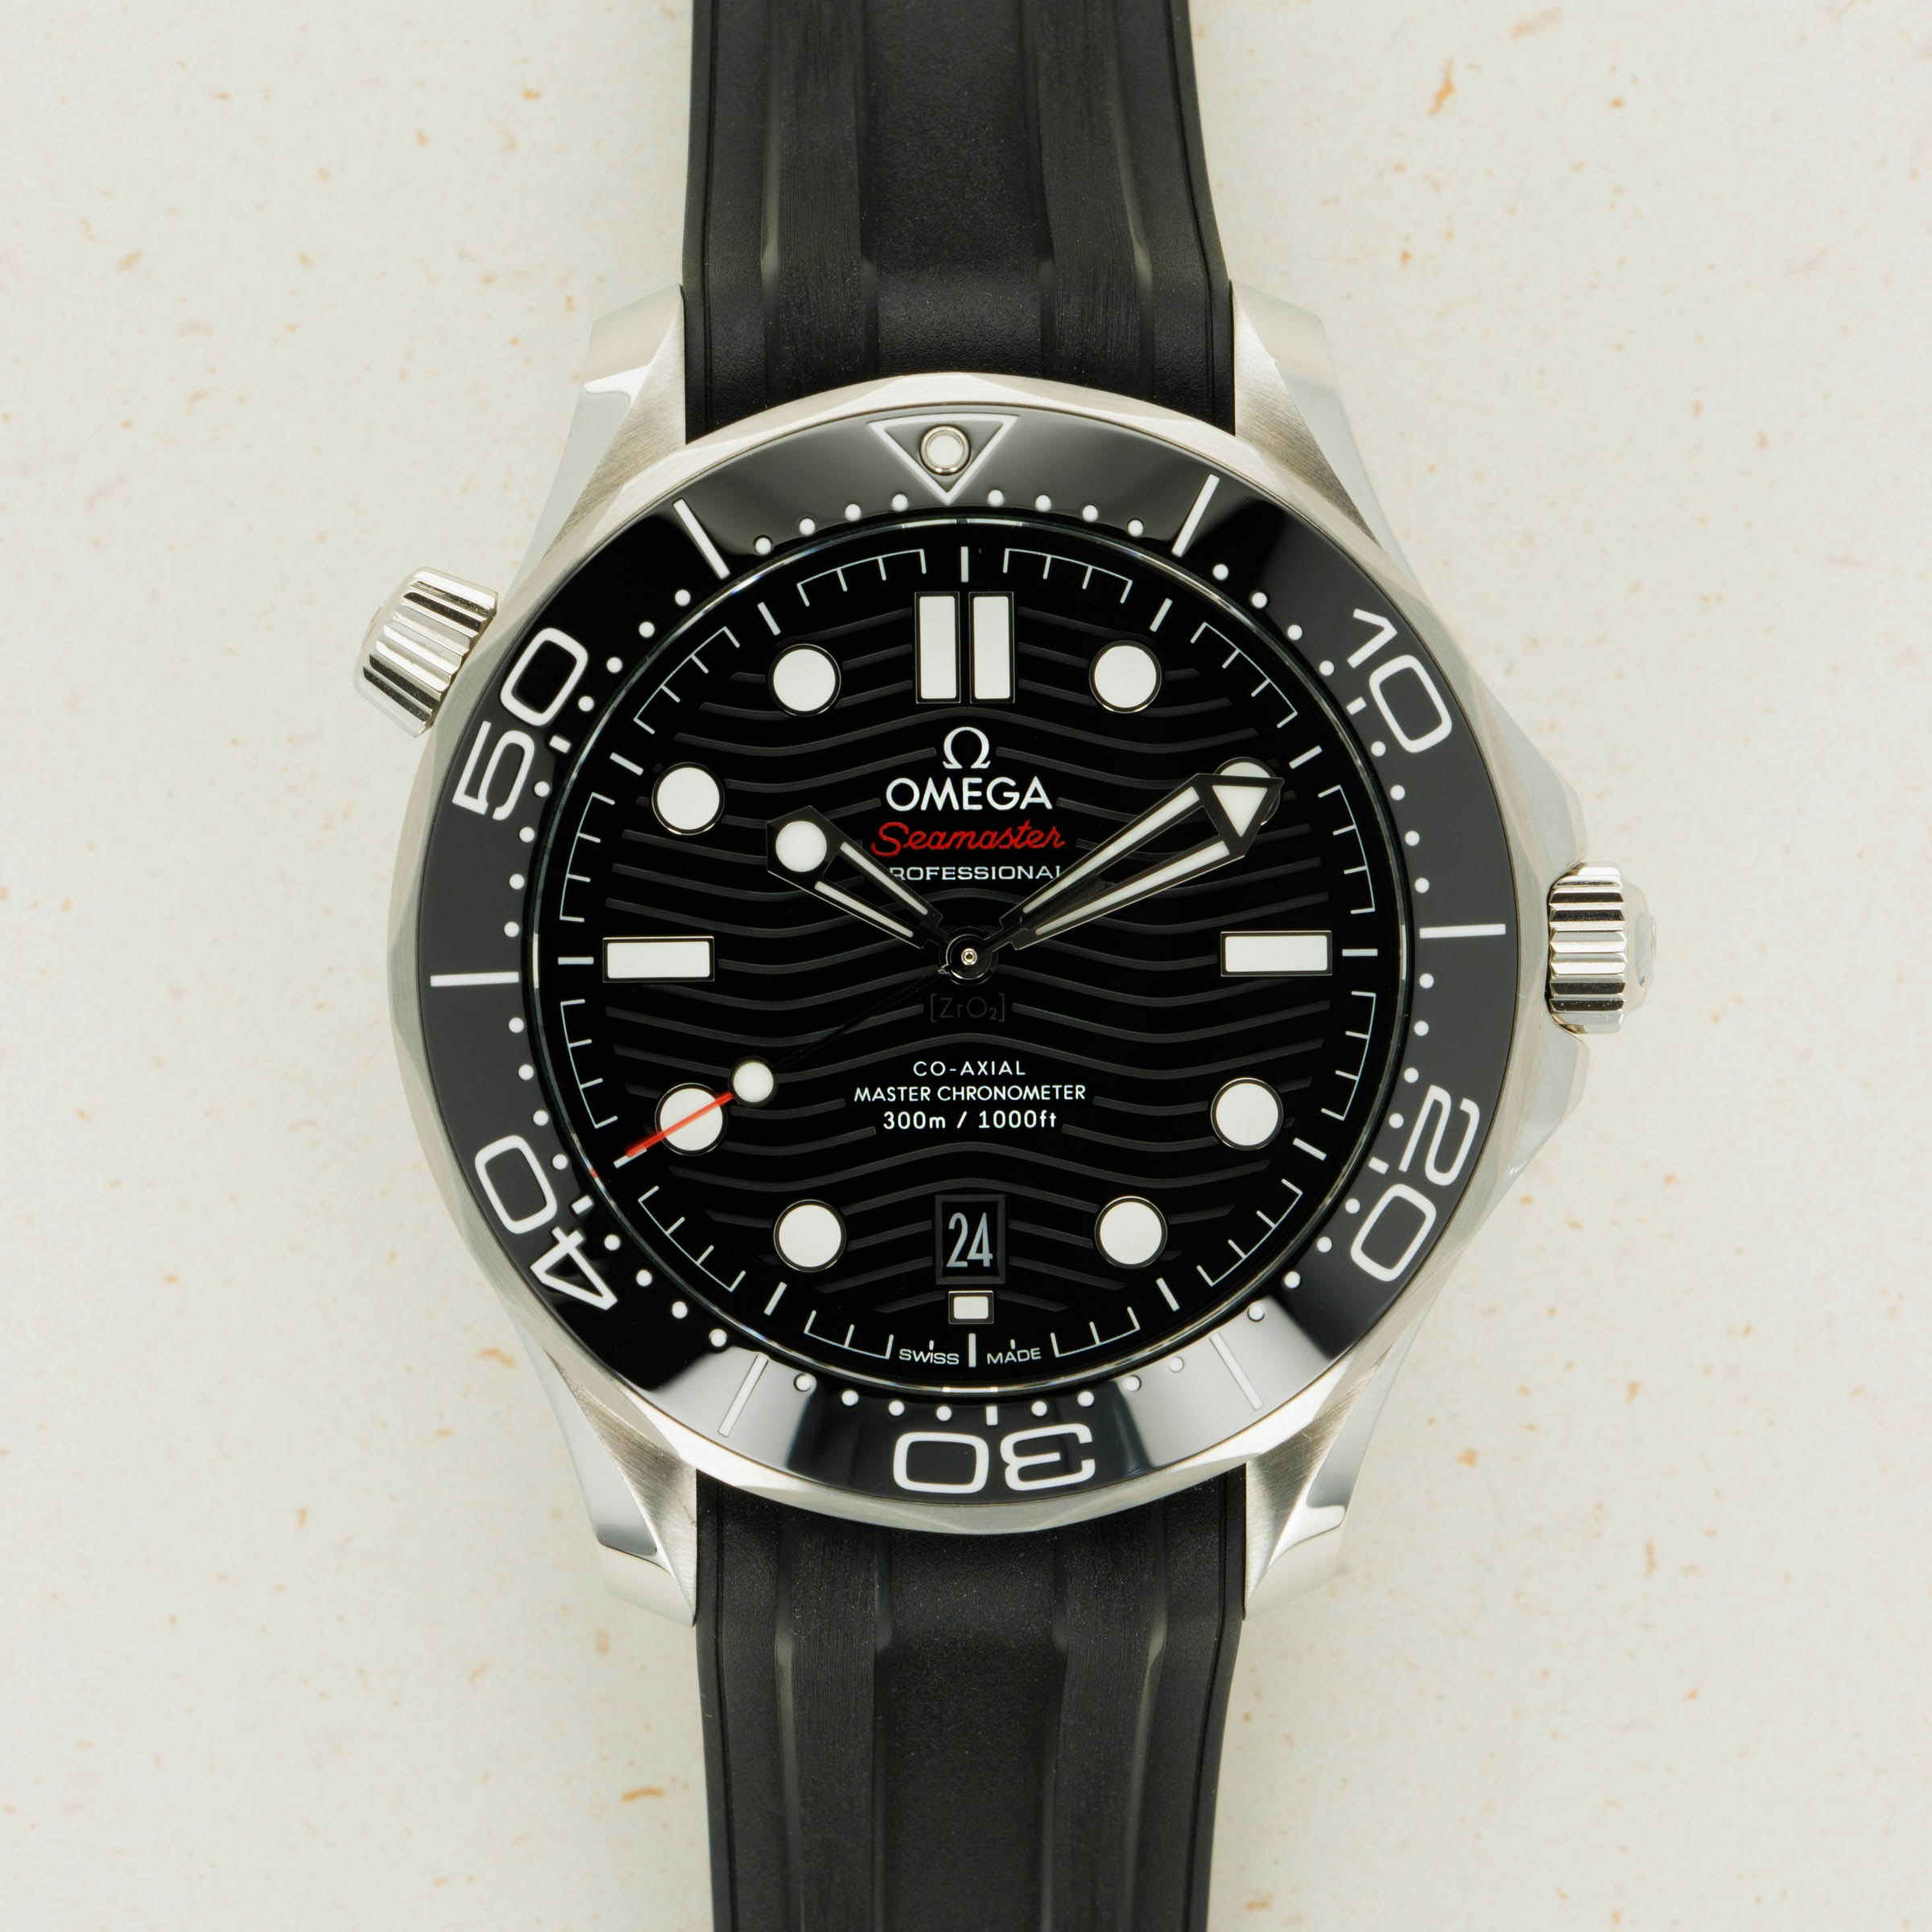 Thumbnail for Omega Seamaster 300 Co-Axial Master Chronometer Divers 210.32.42.20.01.001